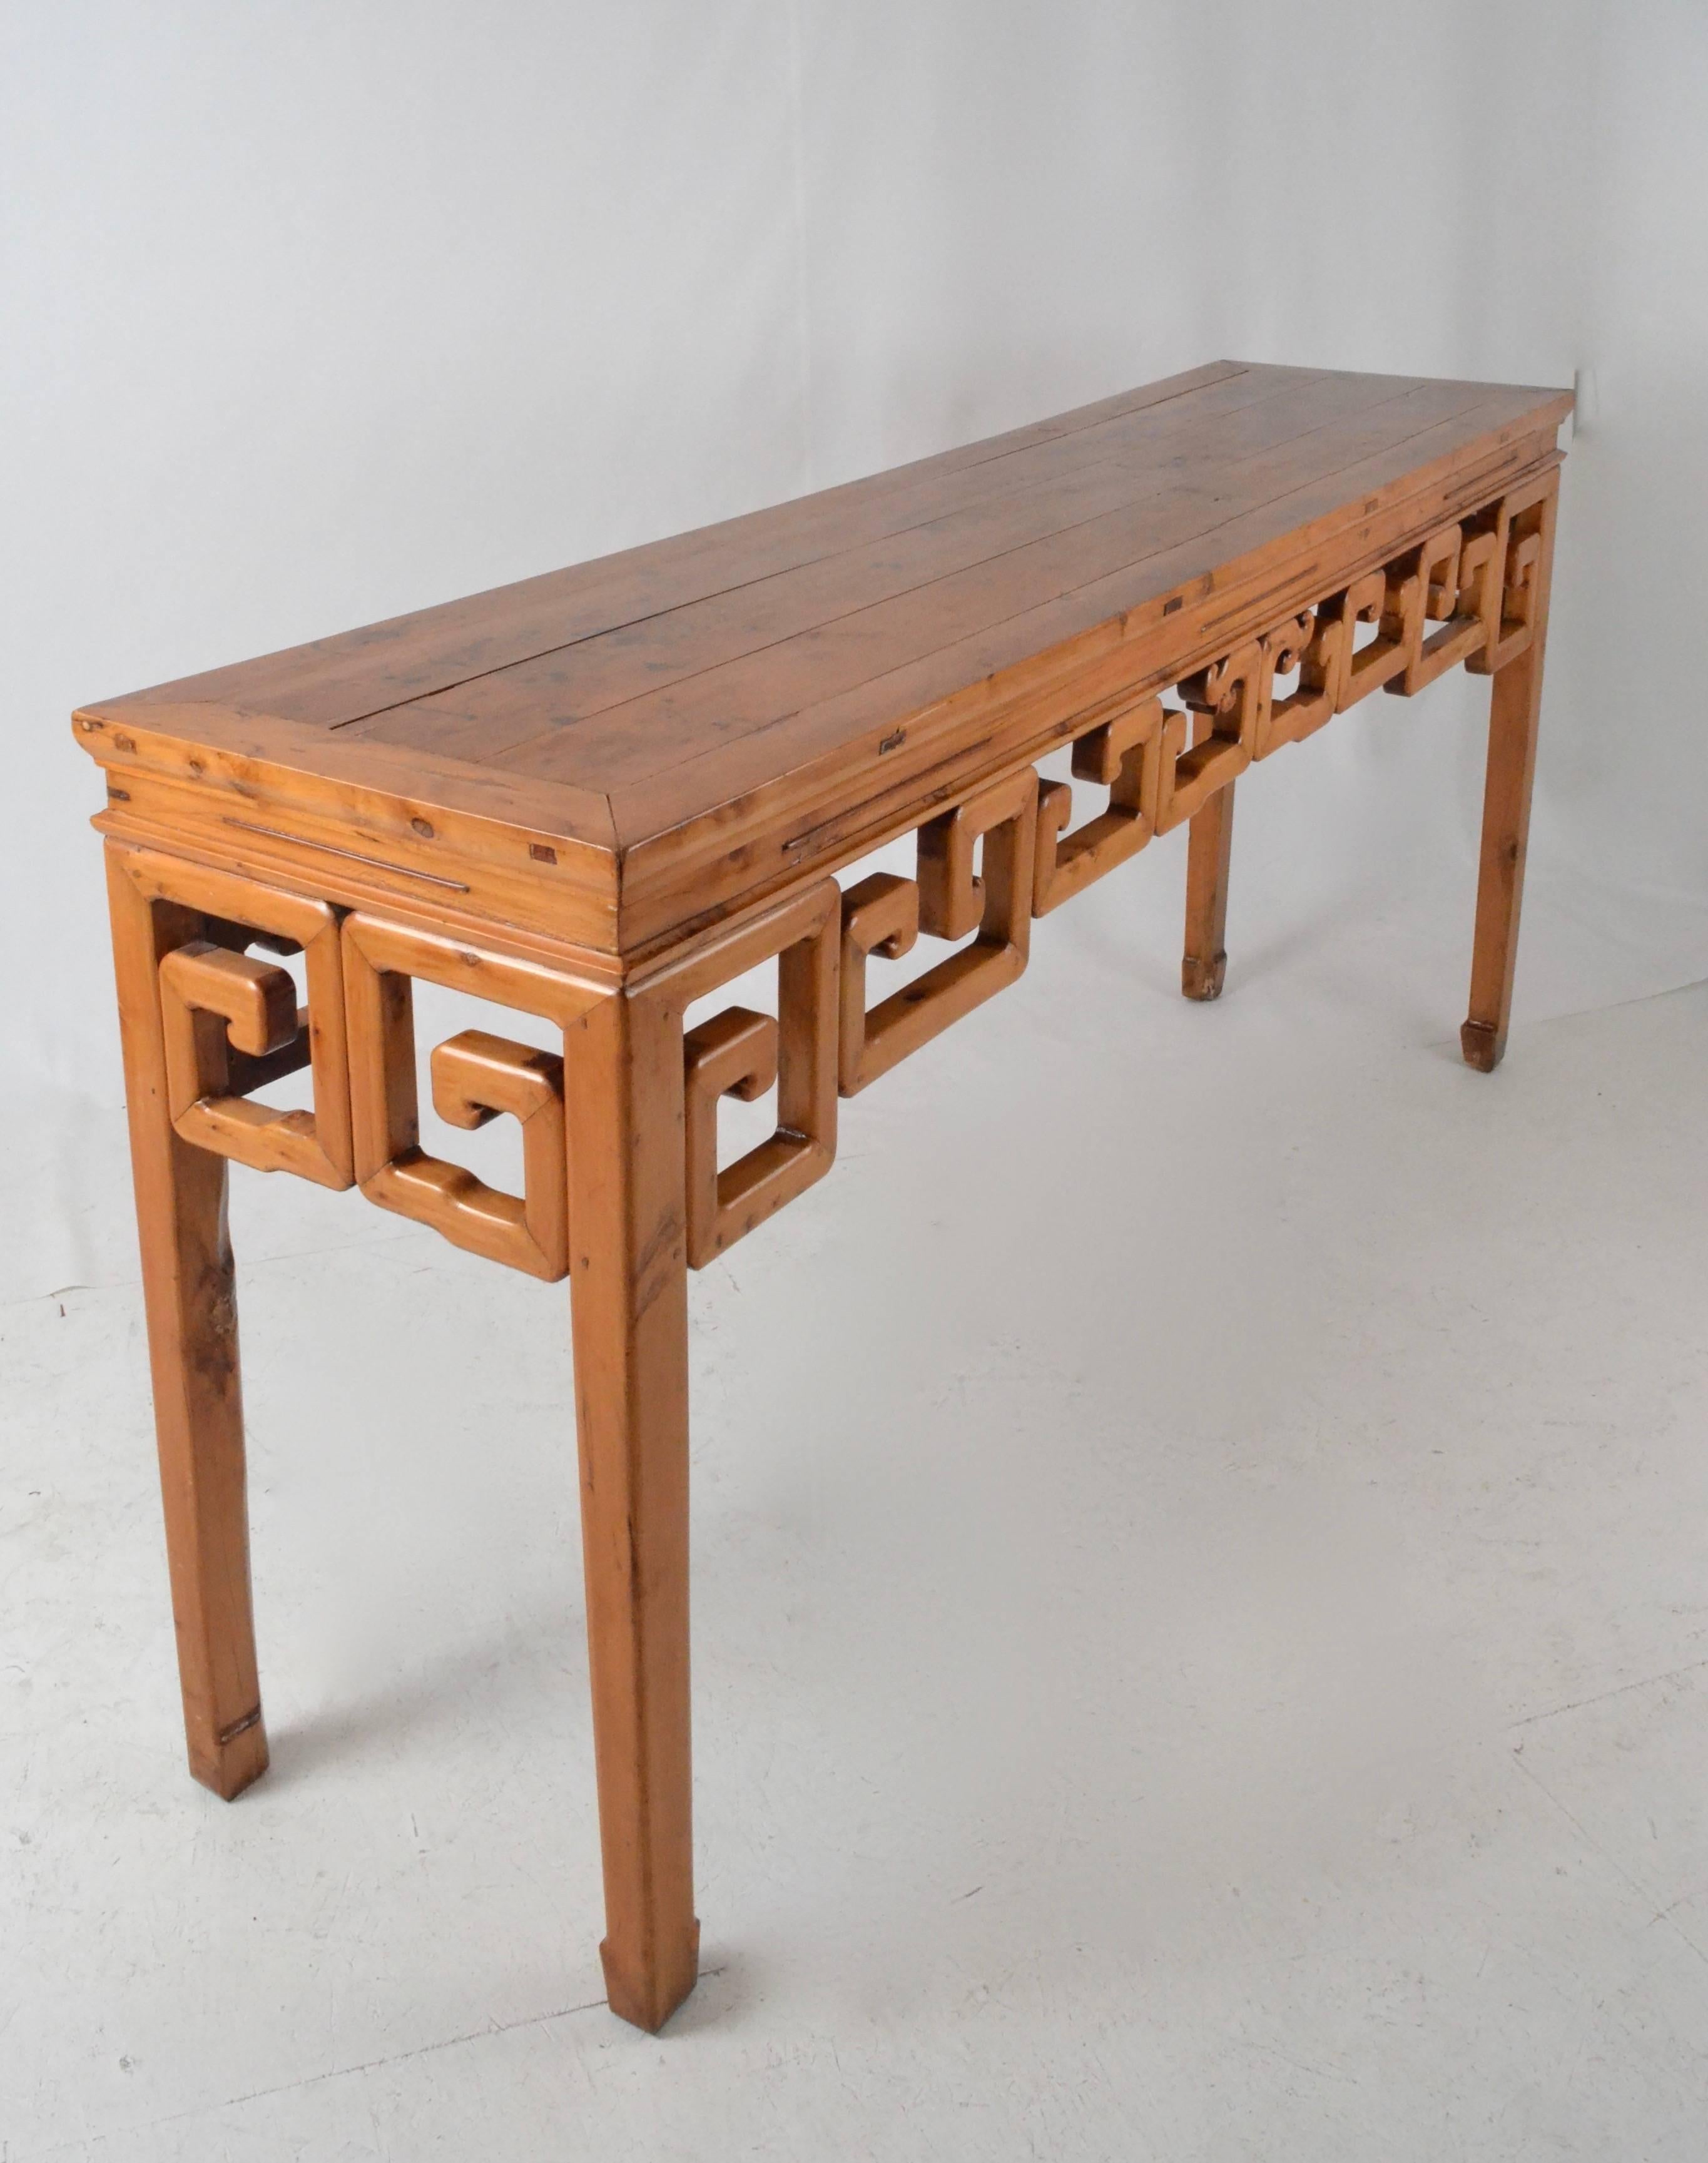 Great size and finish on this alter table/console. Handsome architectural detail. Solid and in very fine condition.